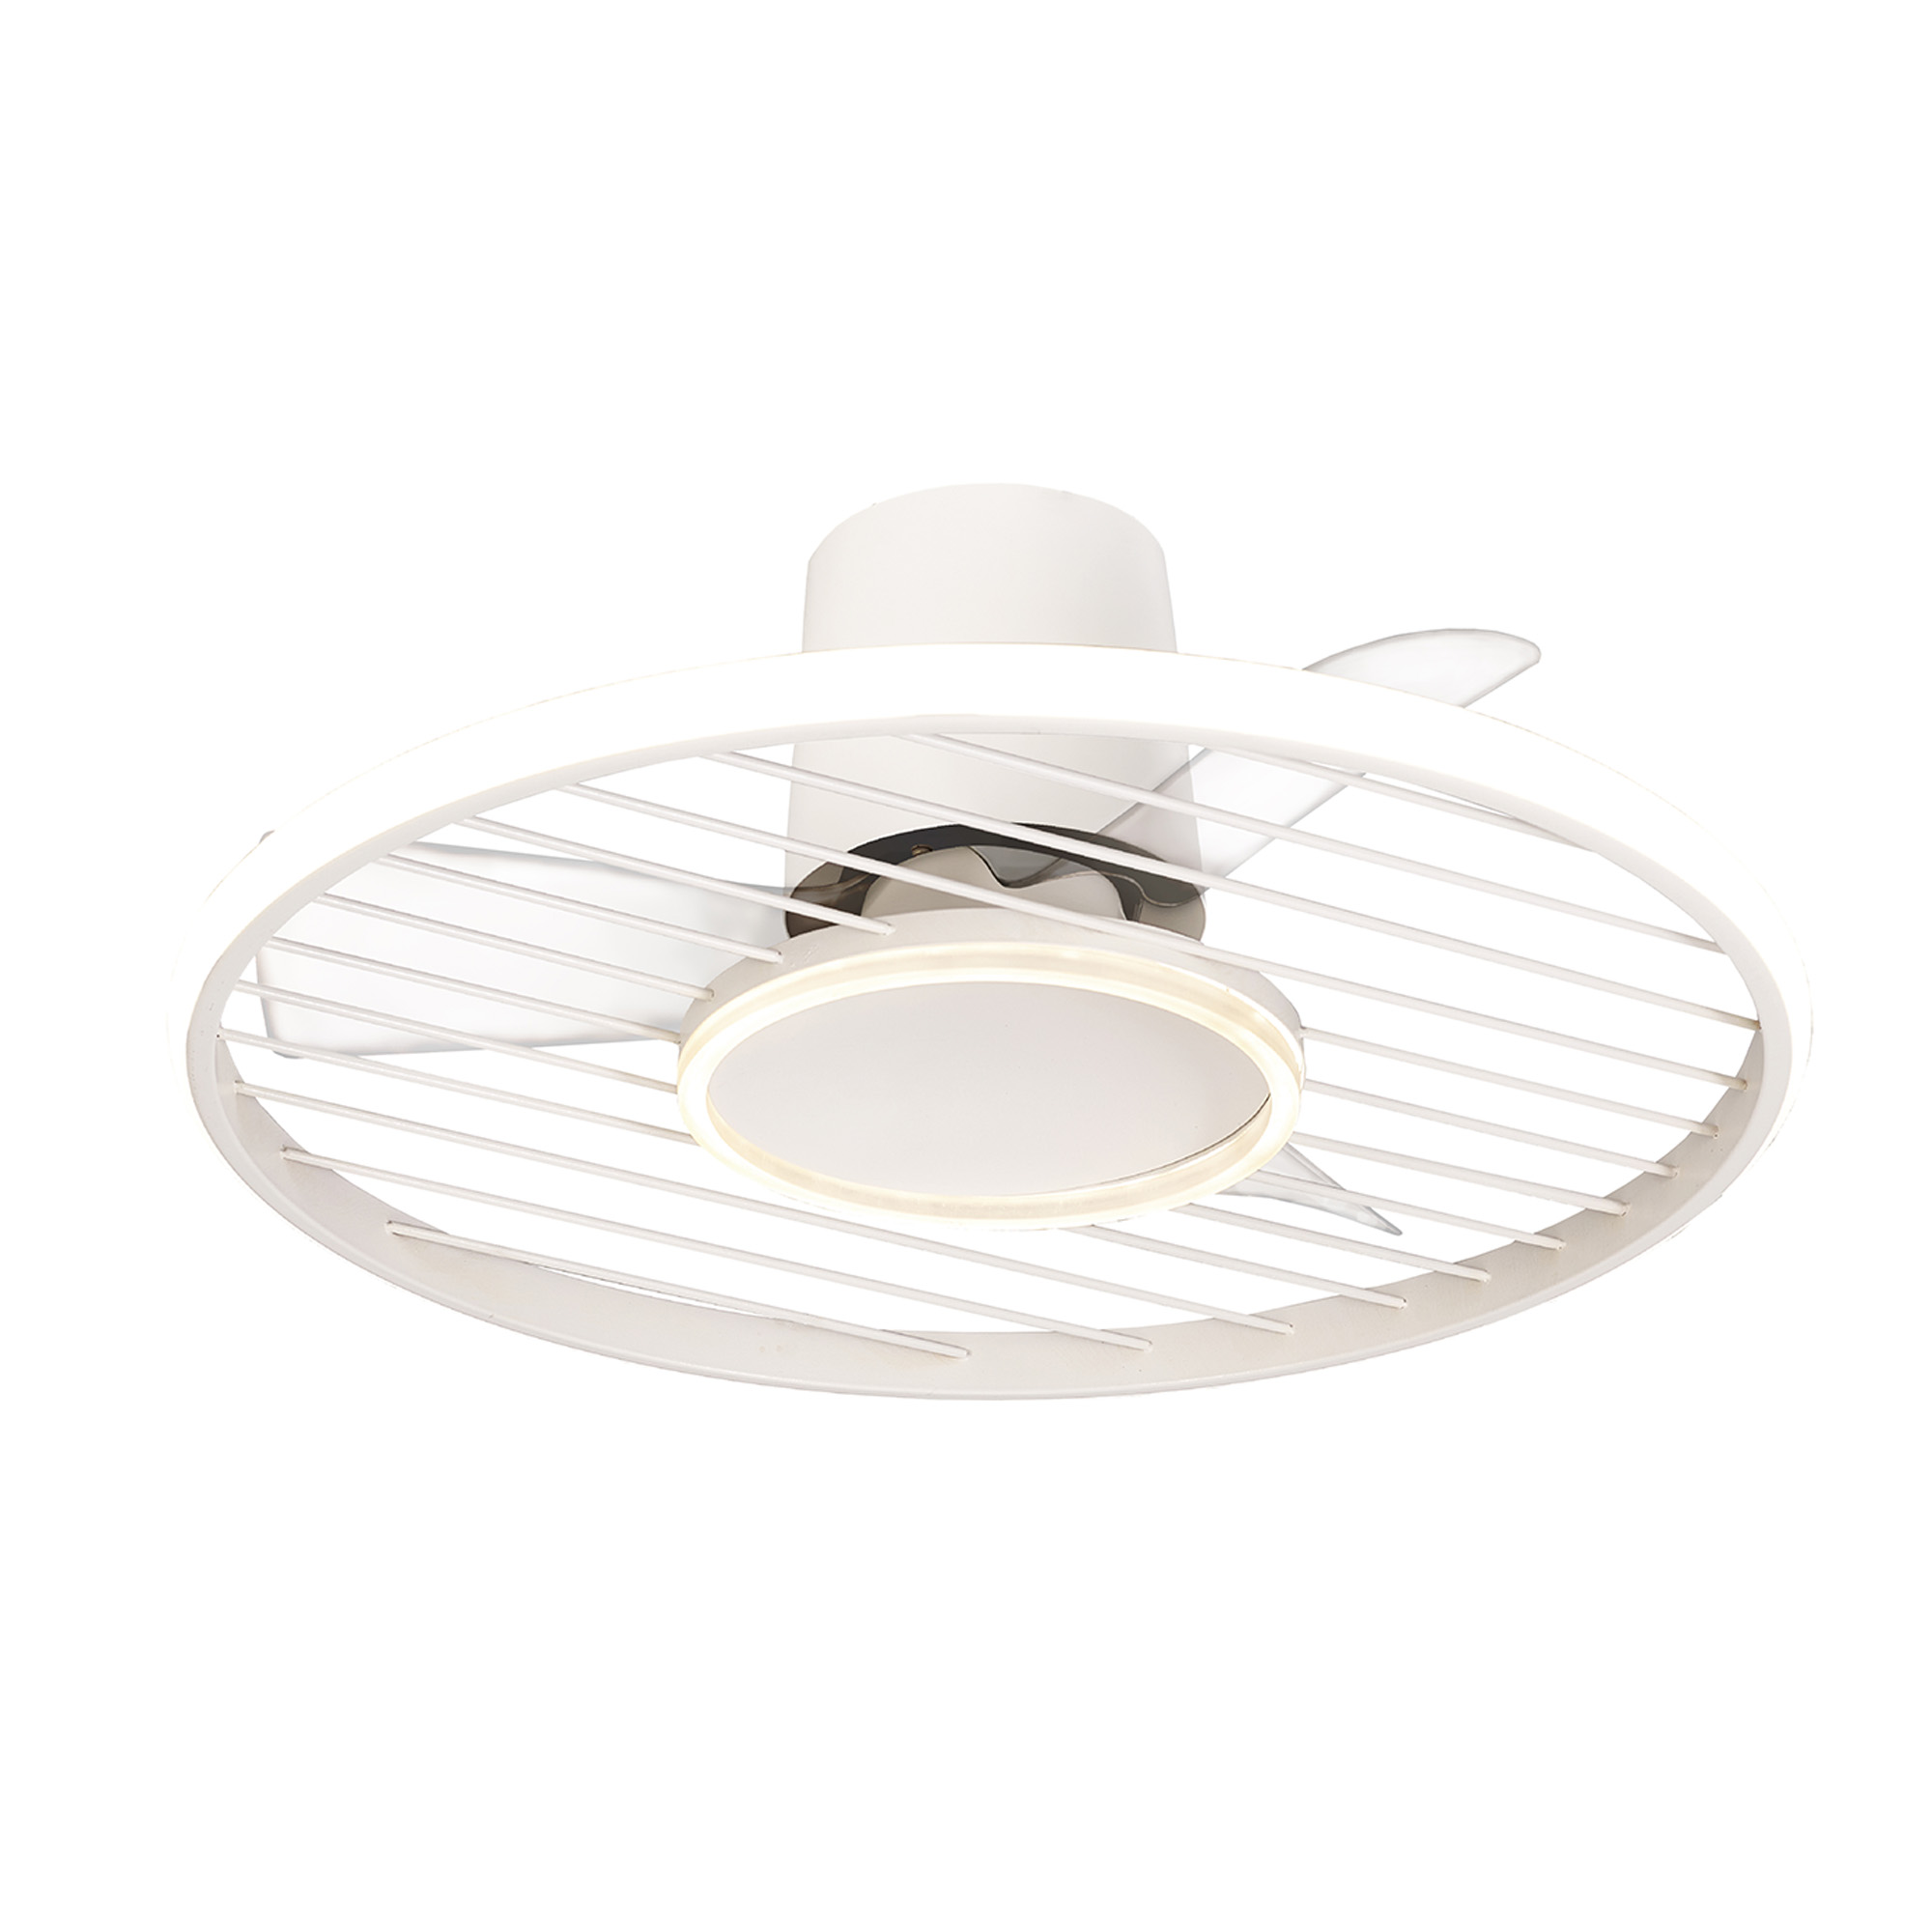 M8720  Soho 45W LED Dimmable Ceiling Light With Built-In 30W DC Fan; 2700-5000K Remote & APP Control; White